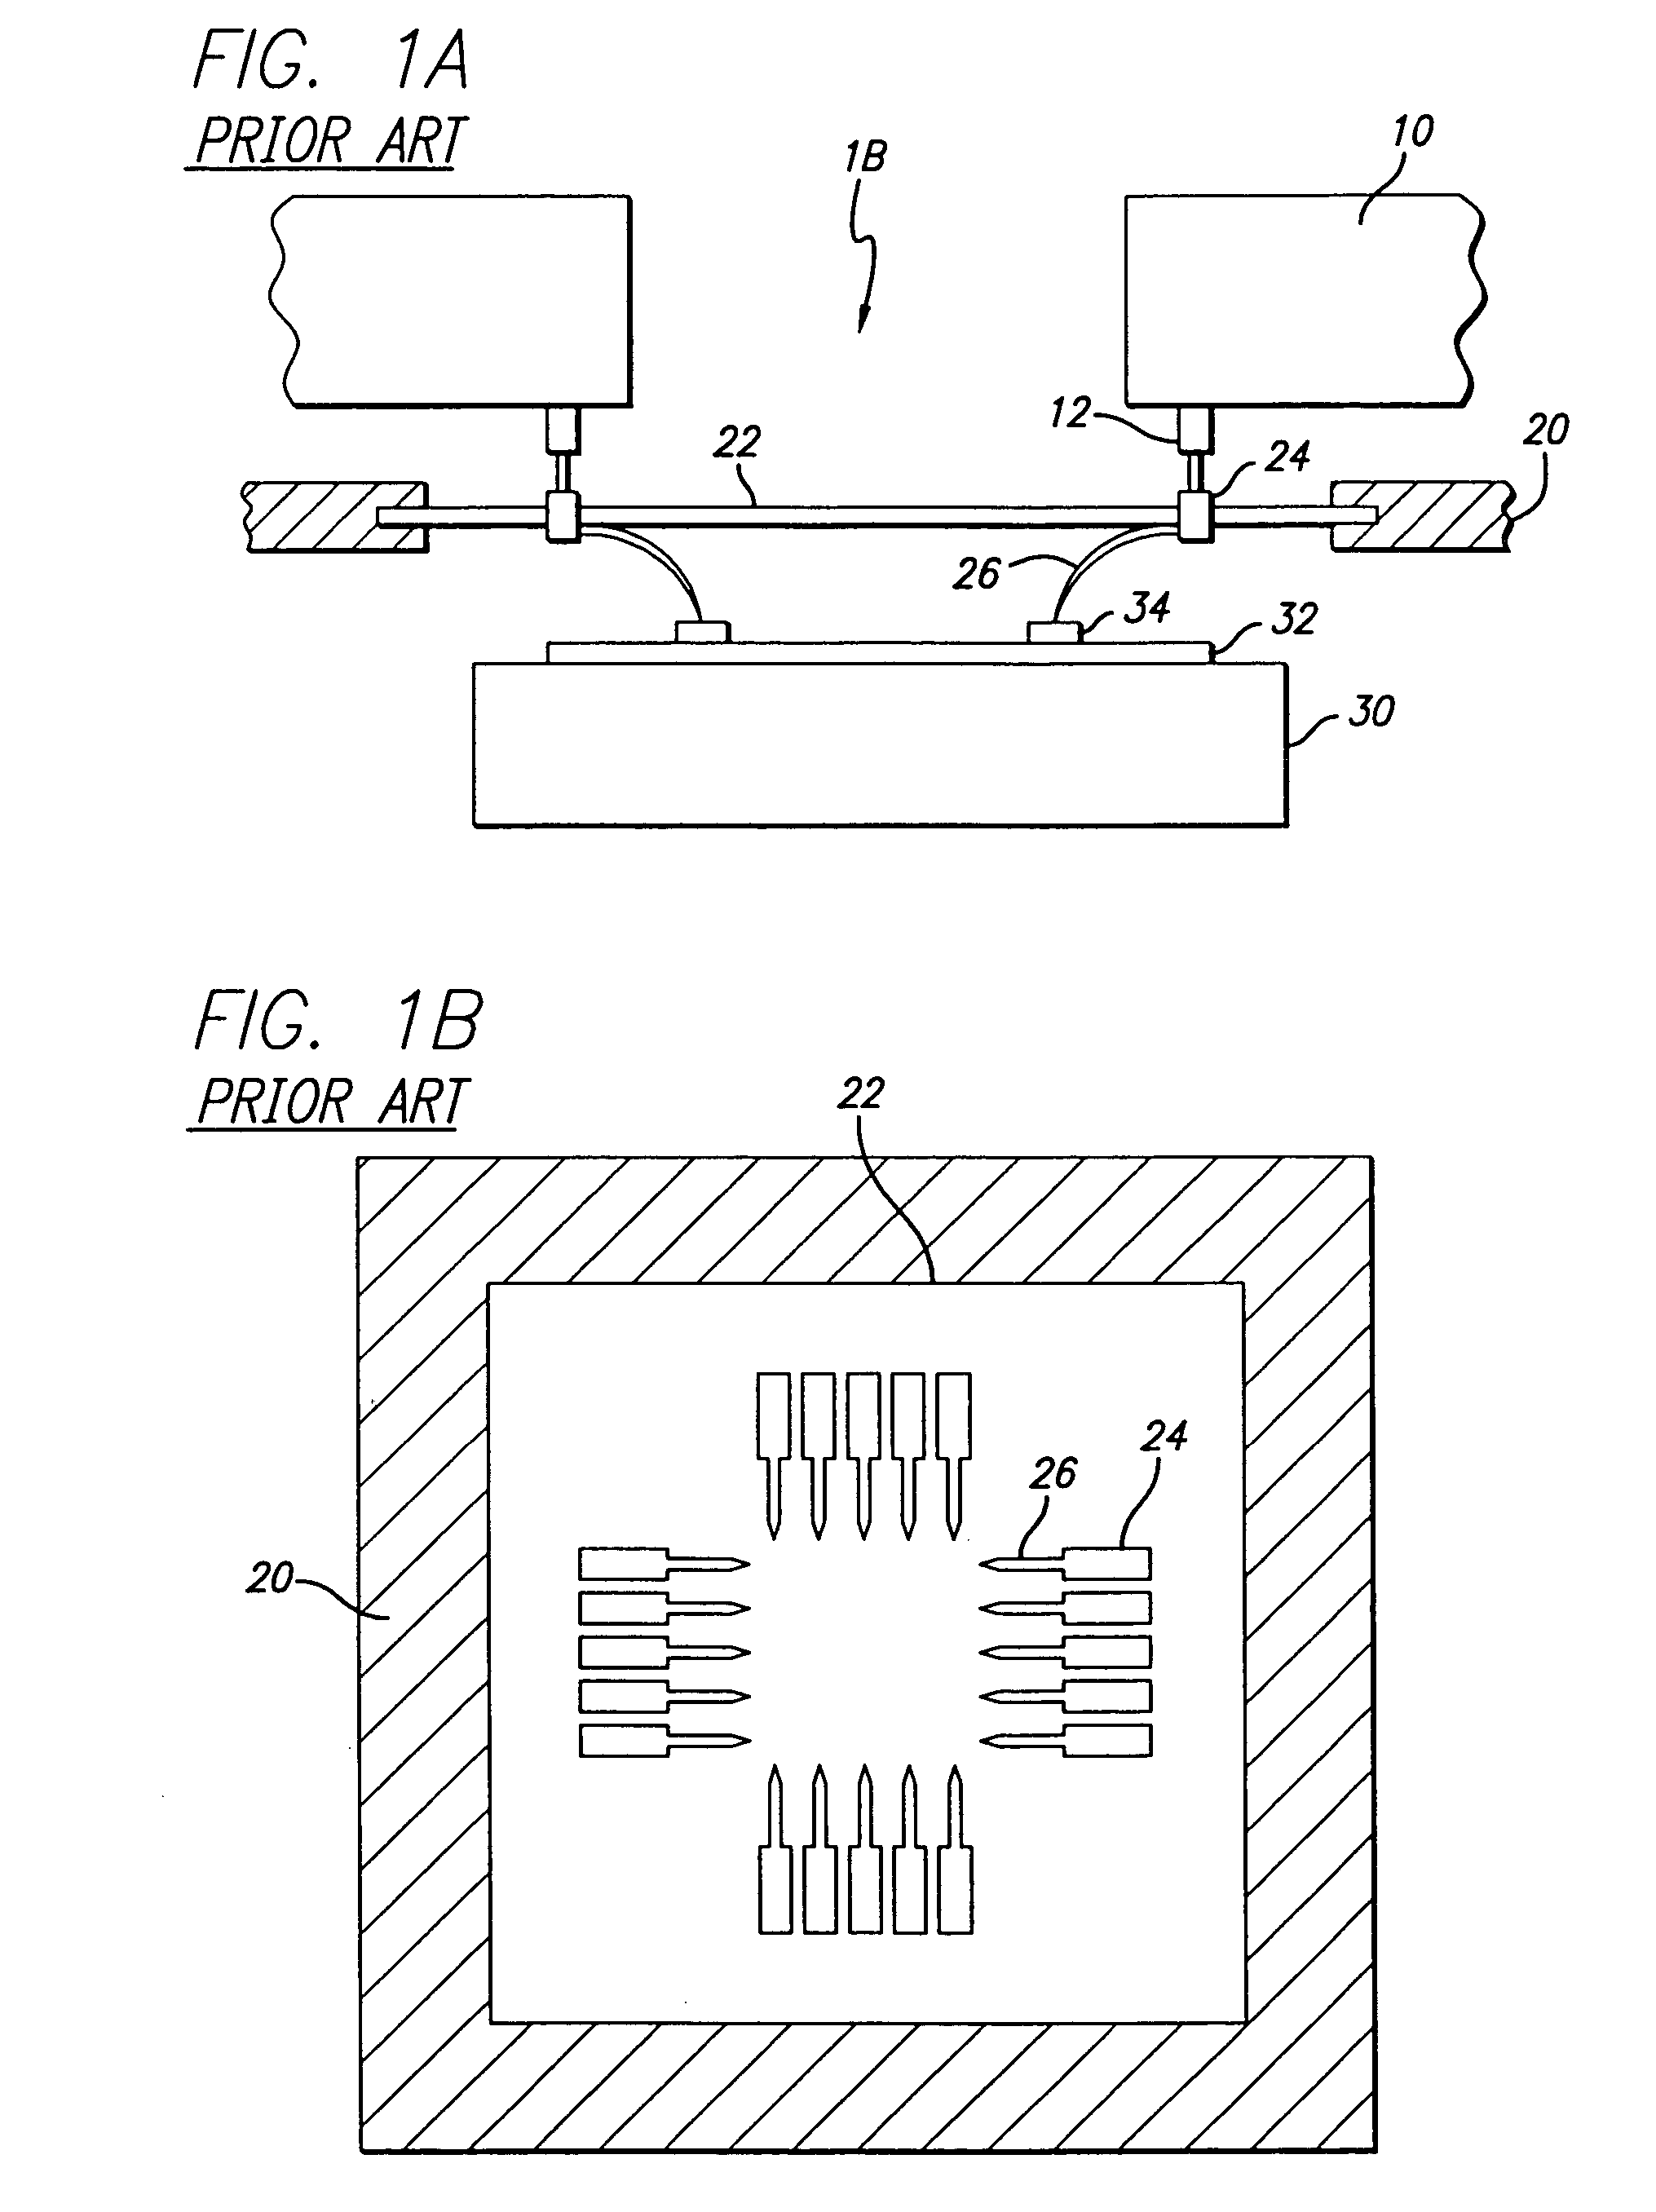 Automated system for designing and testing a probe card